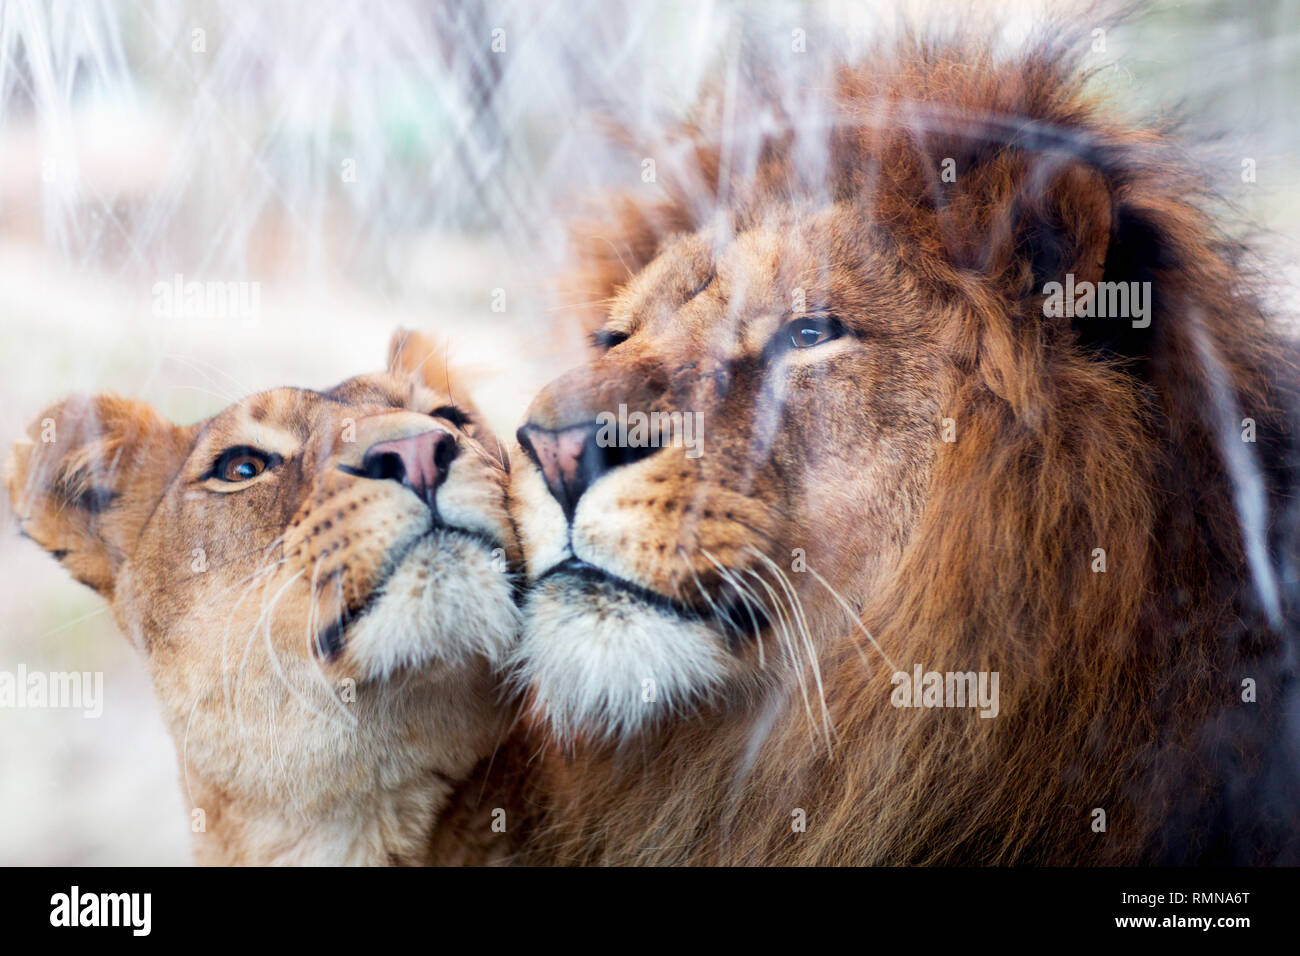 Lion couple together Stock Photo